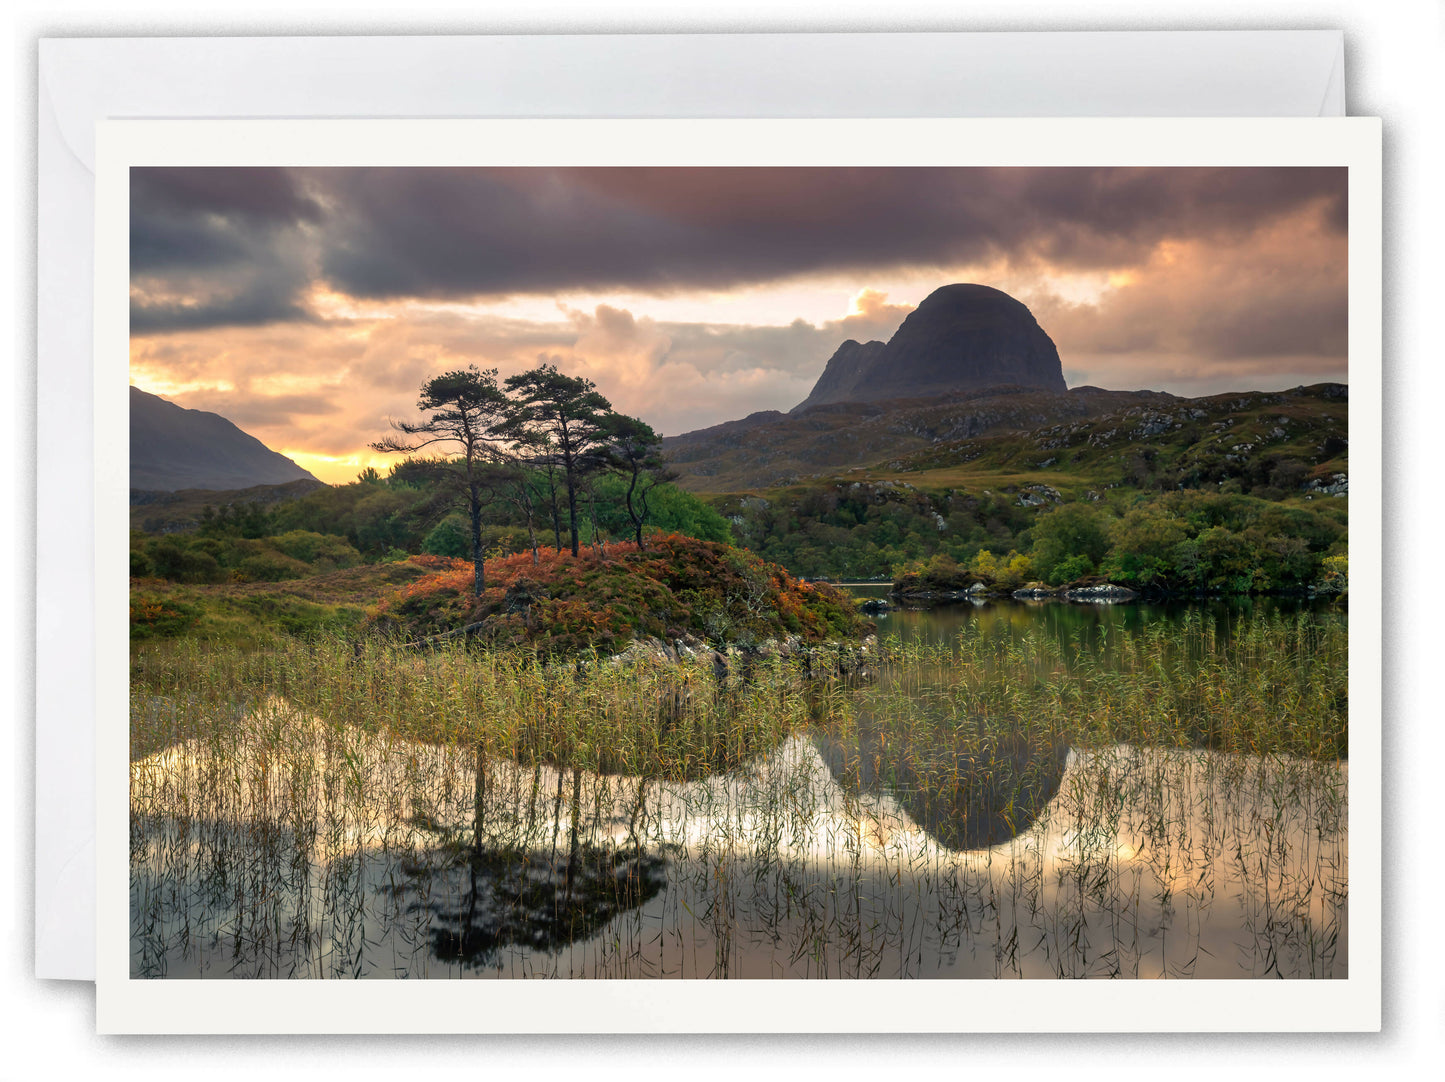 Suilven nr Lochinver - Scotland Greeting Card - Blank Inside